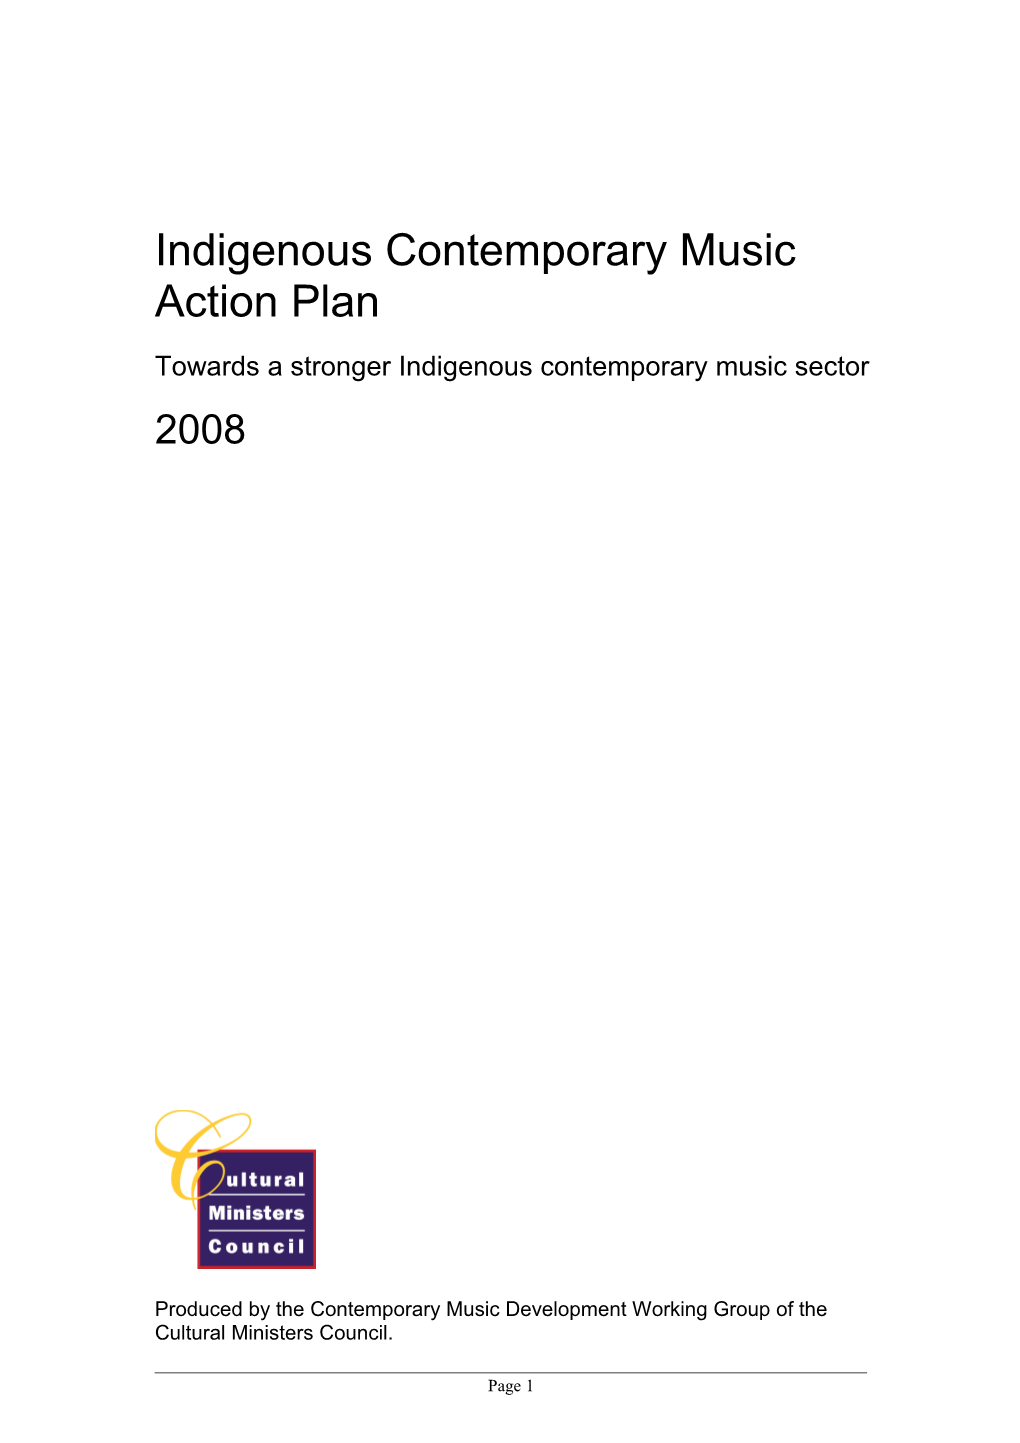 Indigenous Contemporary Music Initiatives